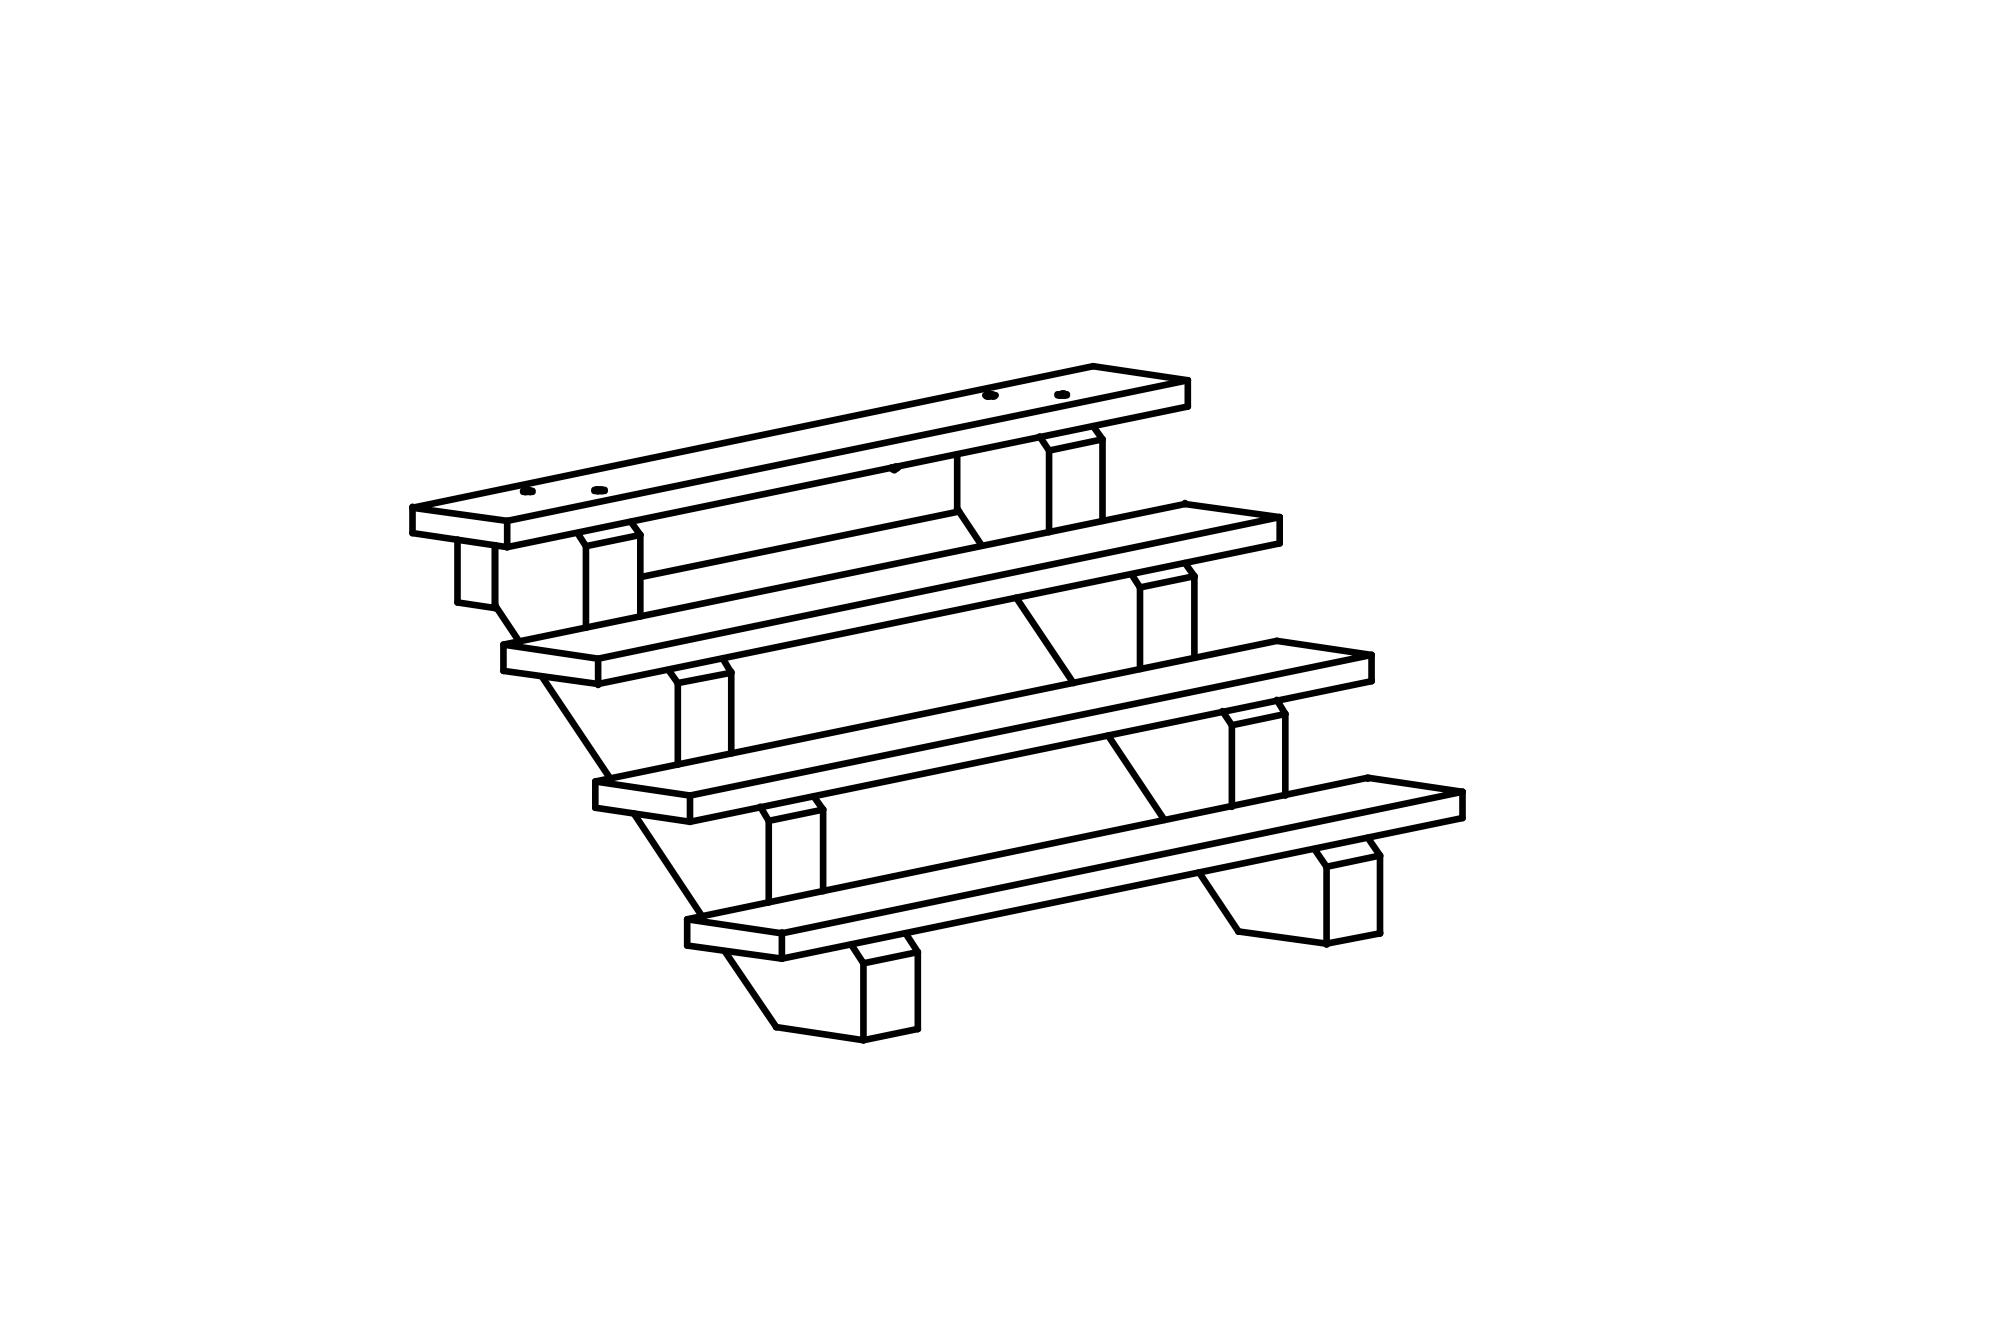 Stairs, attachment height = 0.60 m, width = 1.20 m